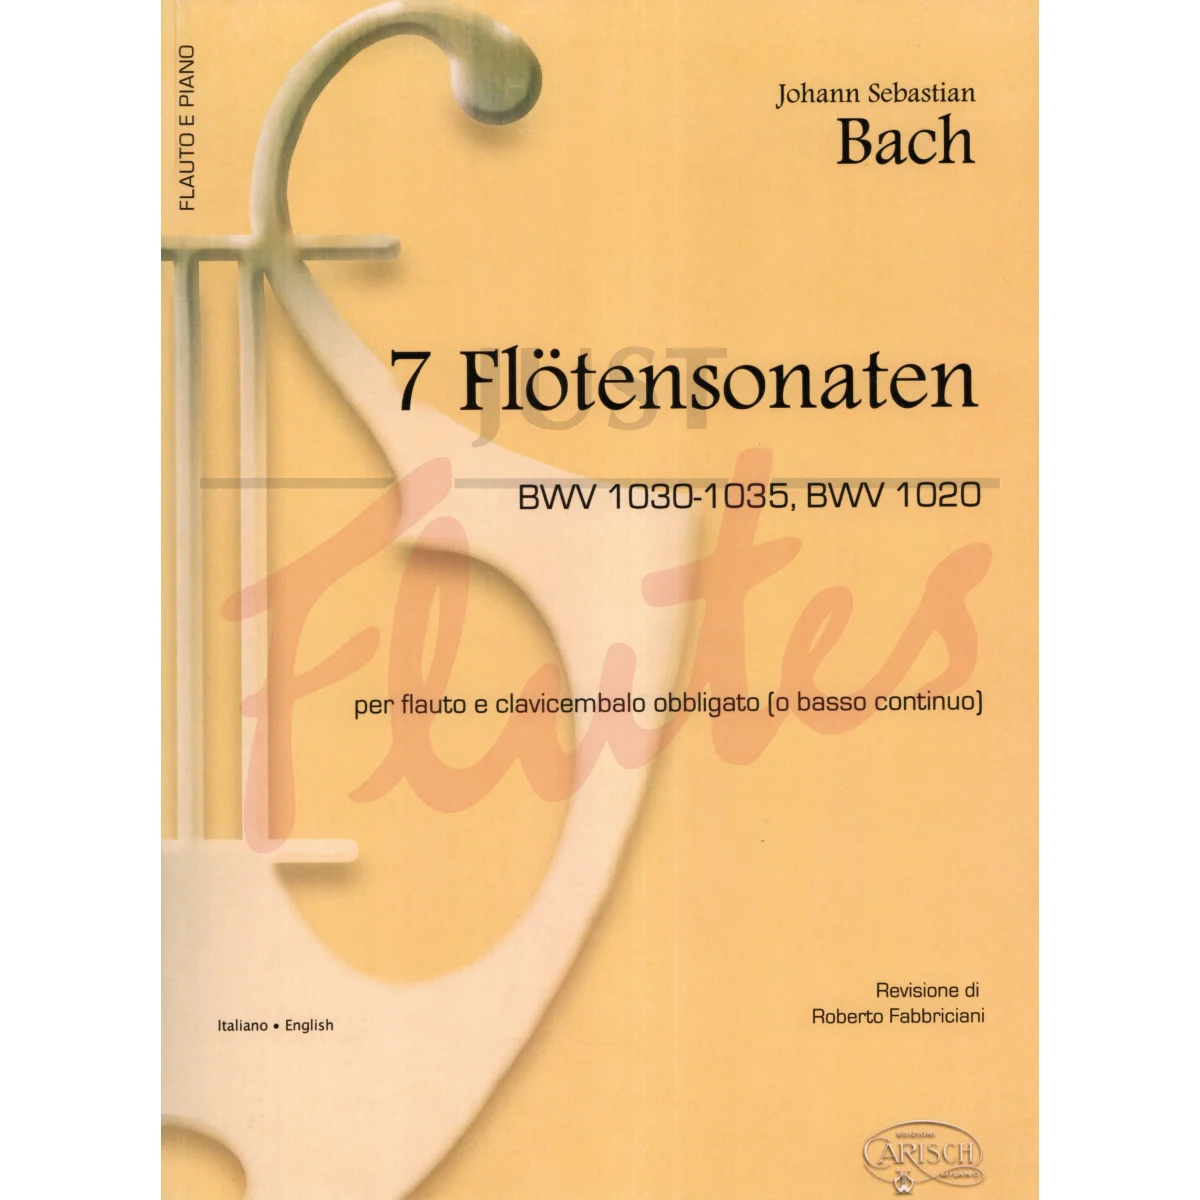 7 Sonatas for Flute and Piano